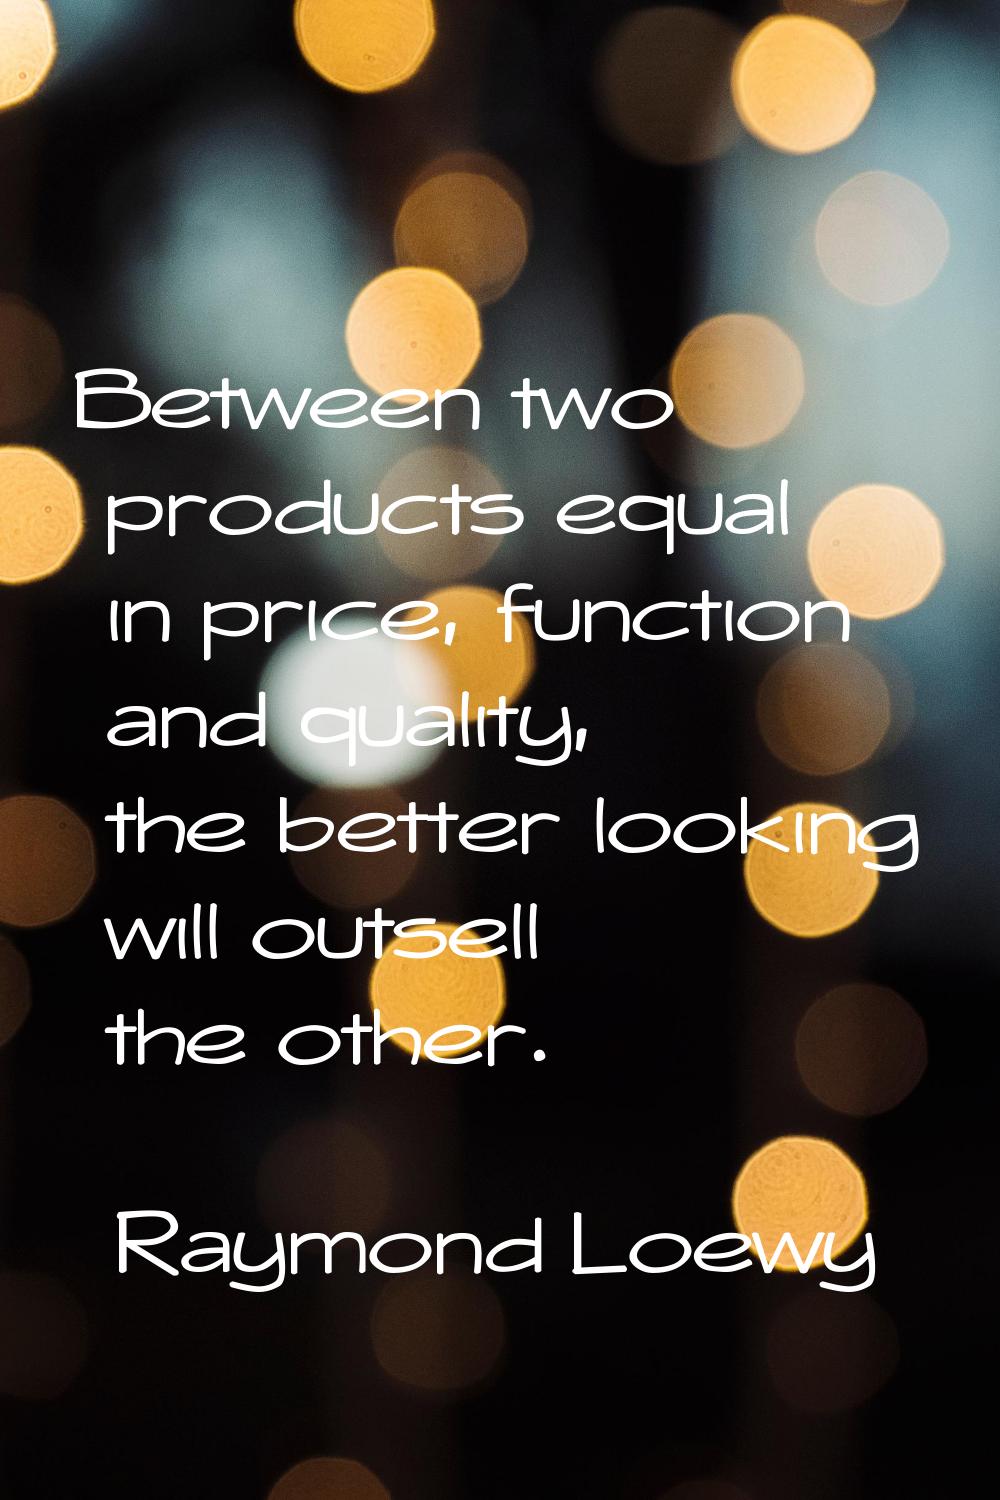 Between two products equal in price, function and quality, the better looking will outsell the othe